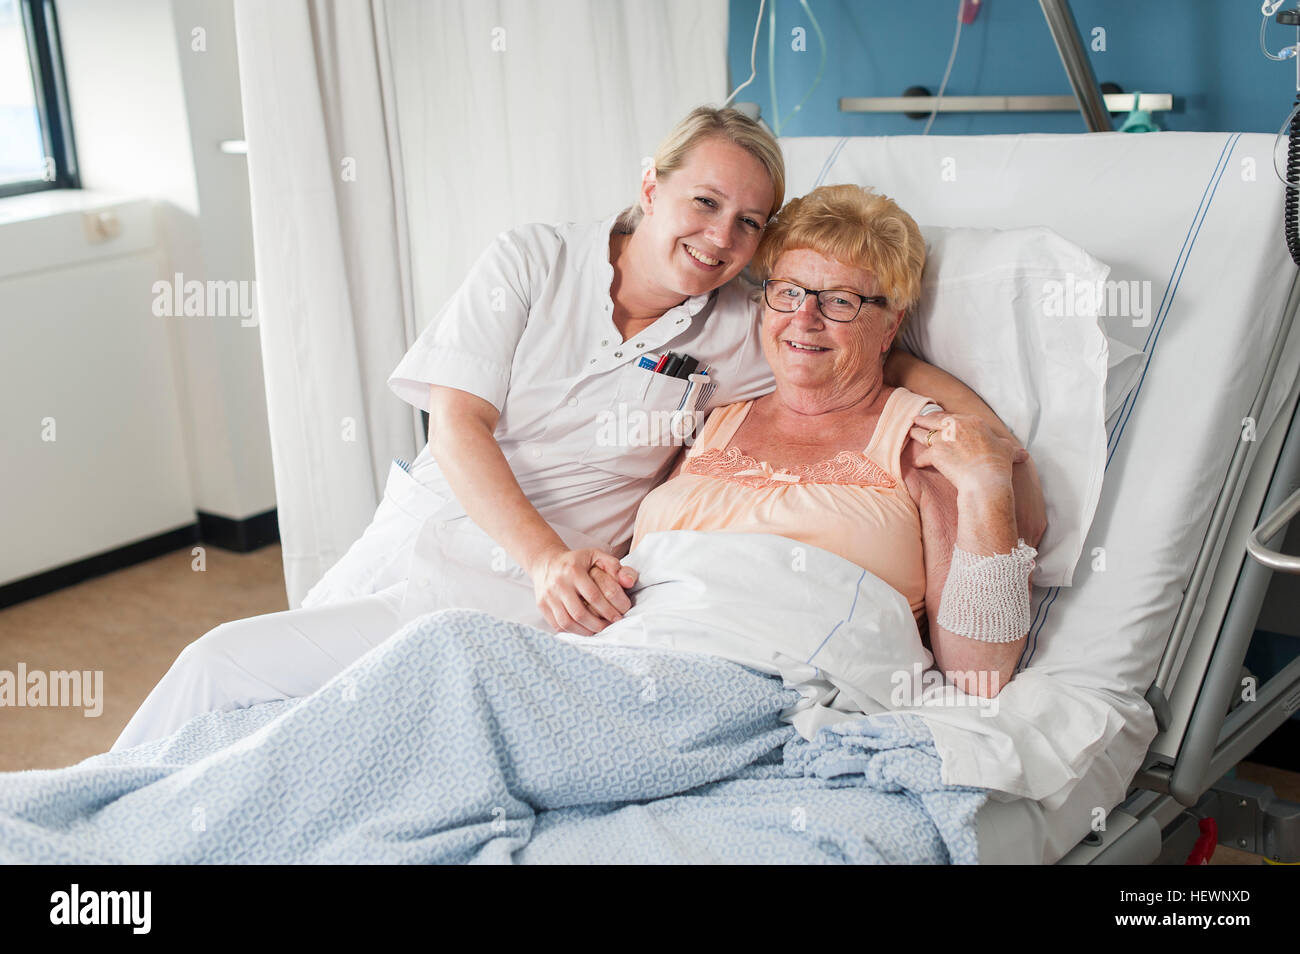 Nurse and patient on hospital bed looking at camera smiling Stock Photo